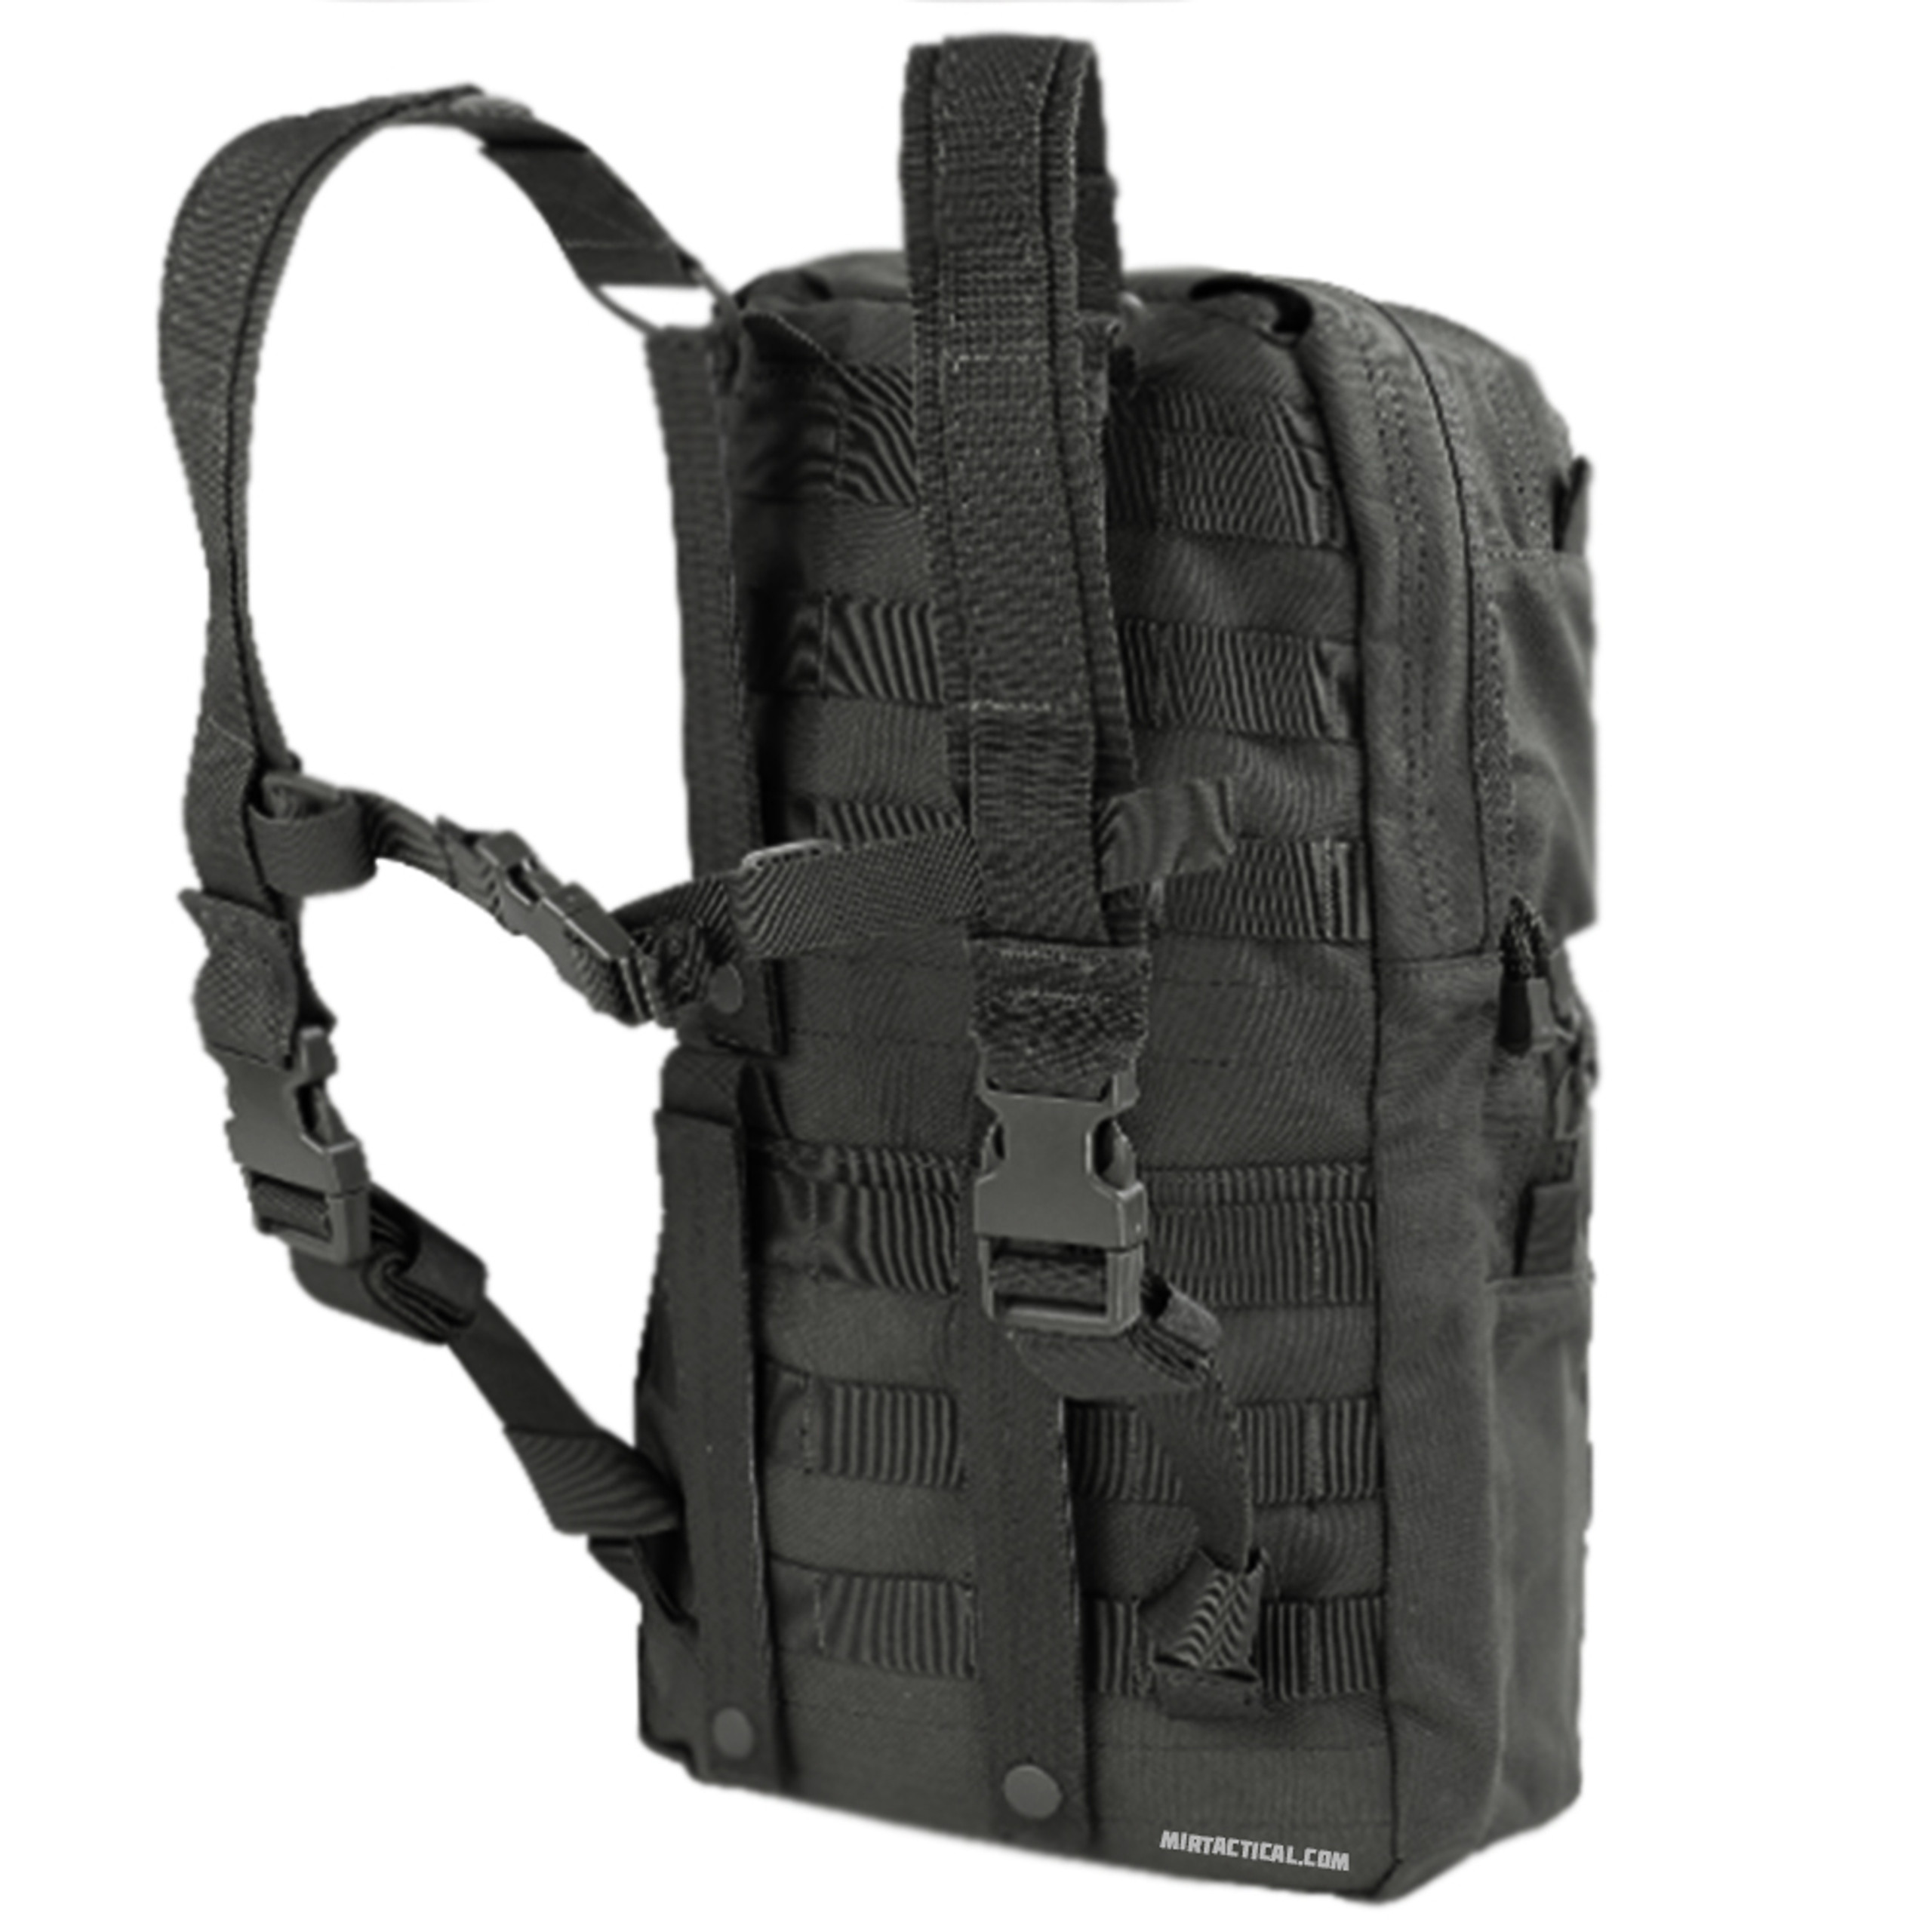 HYDRATION CARRIER 2 BLACK low price of $33.99